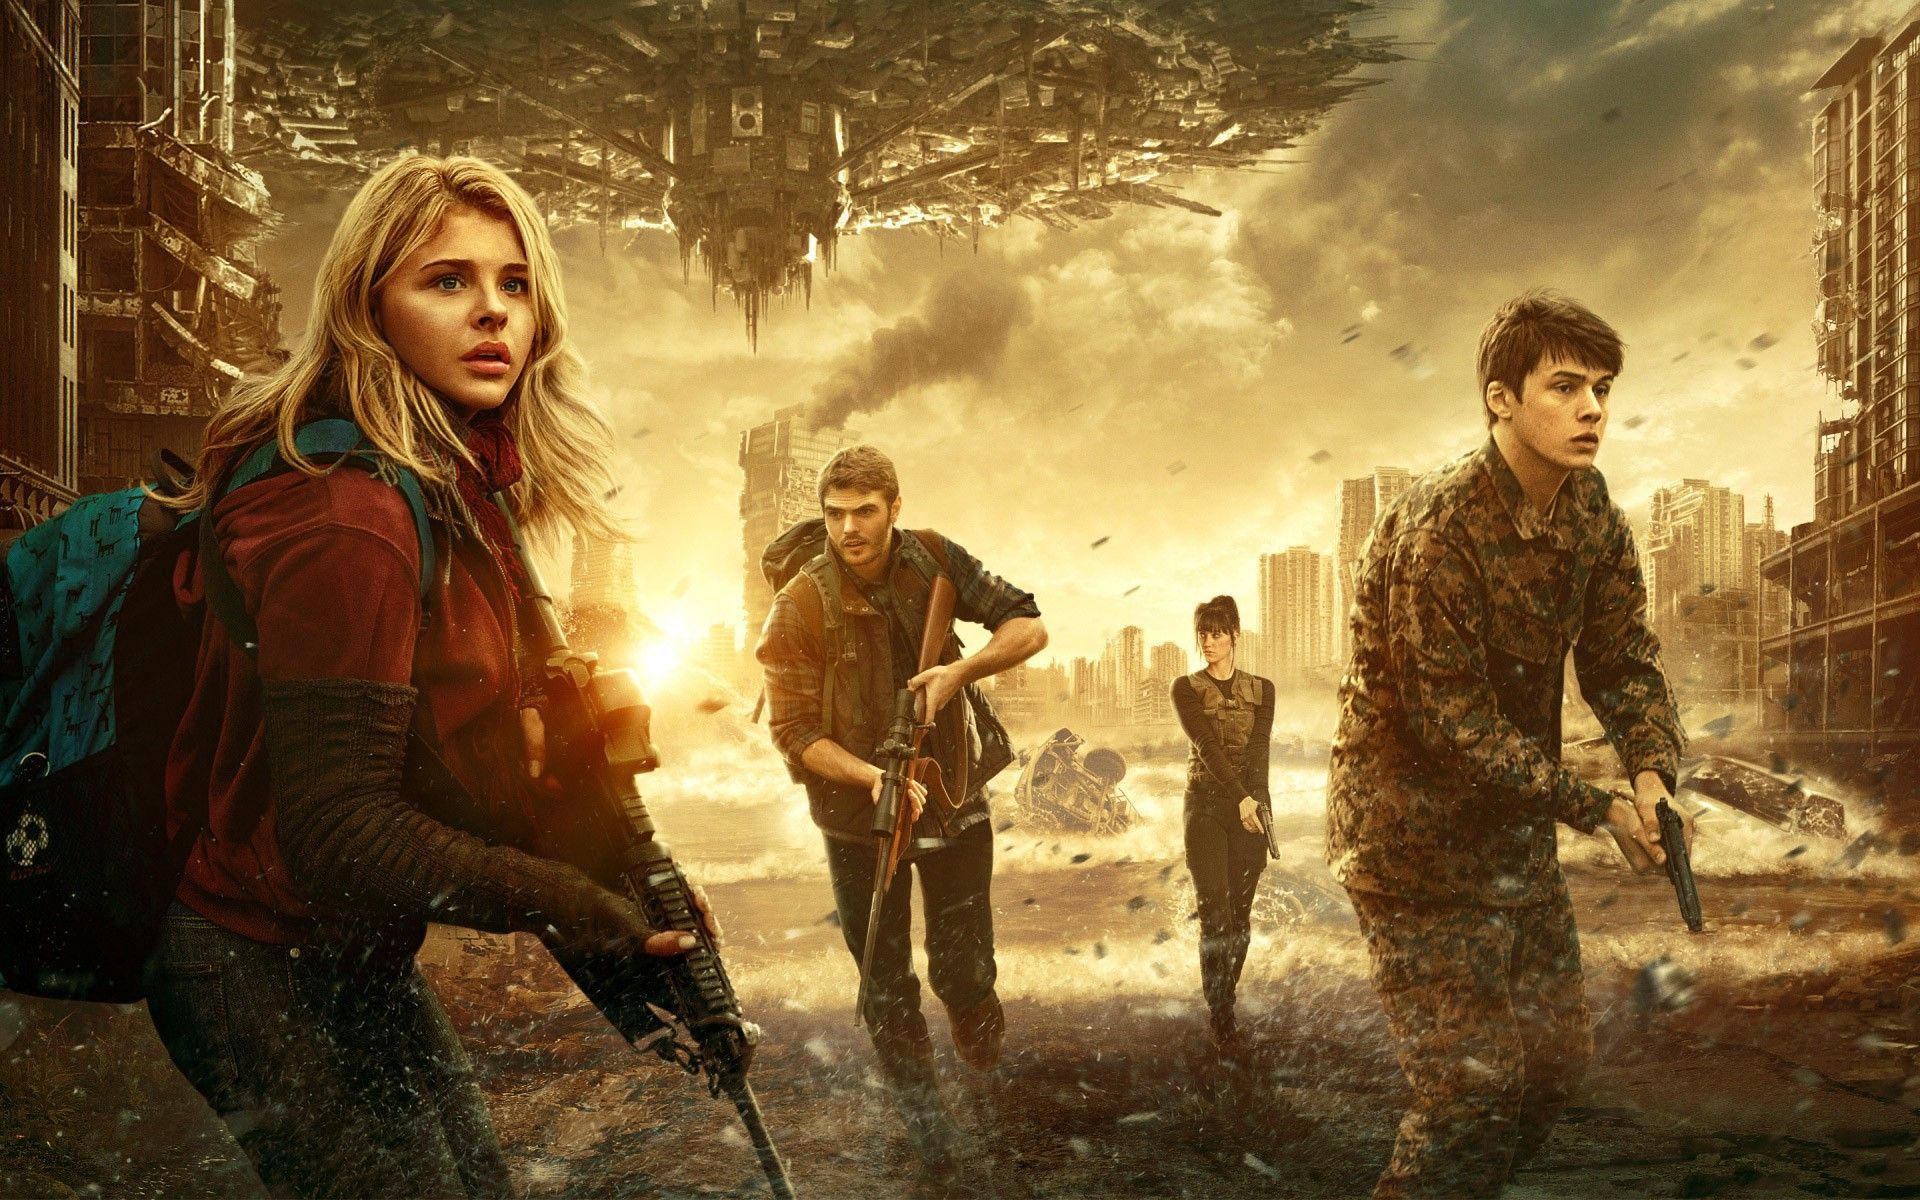 the 5th wave HD Wallpaper. The 5th wave movie, The 5th wave, The 5th wave 2016